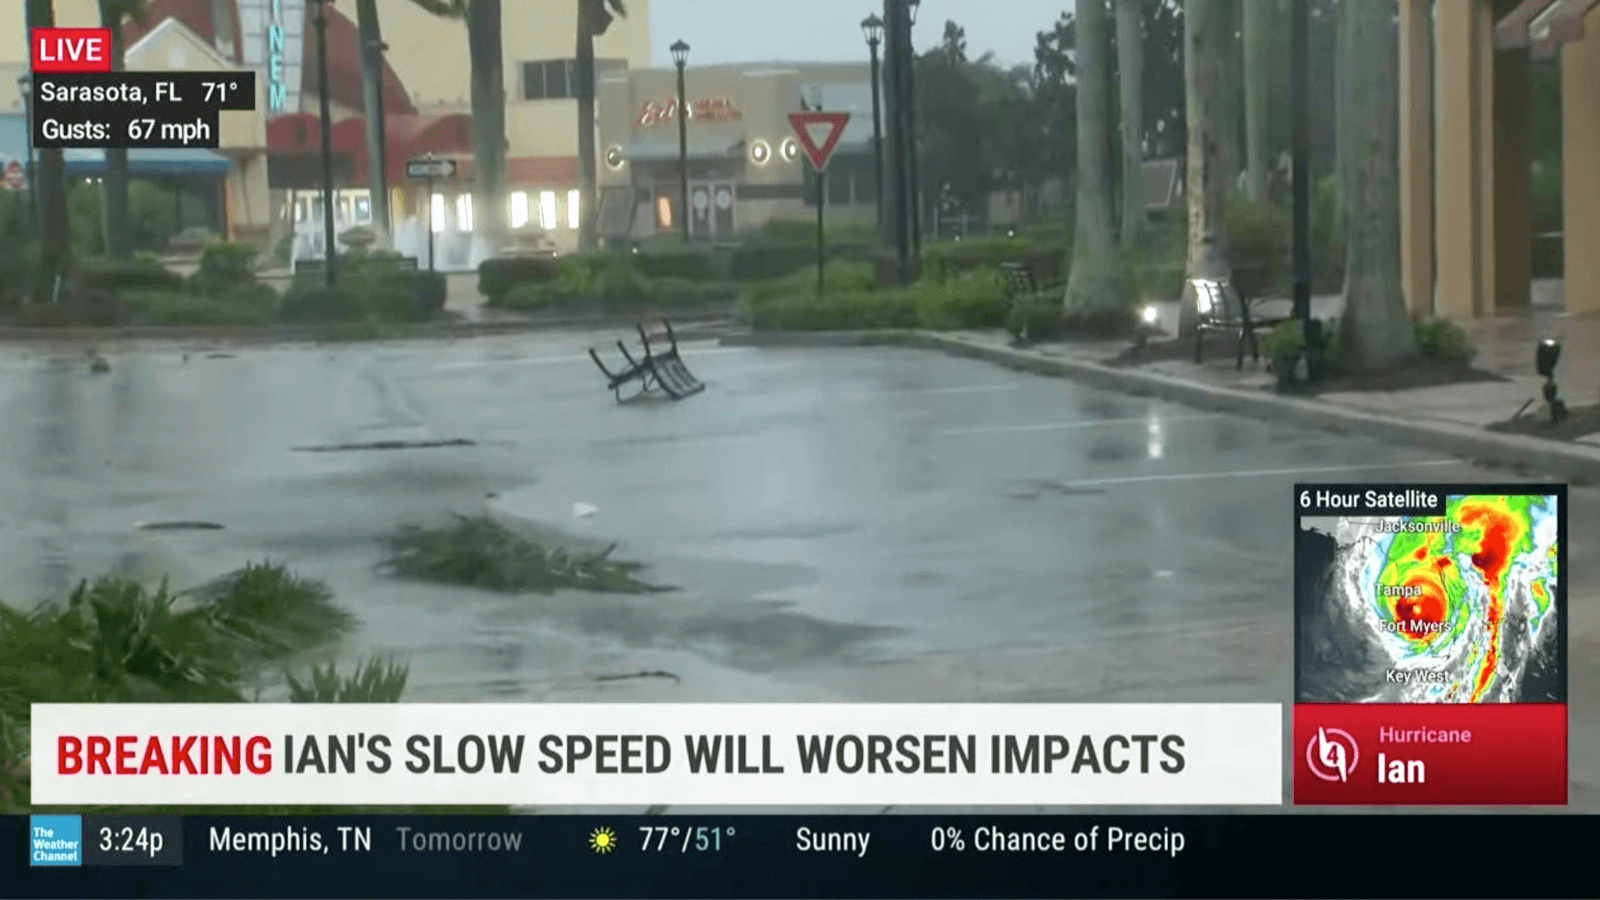 The Weather Channel's coverage of Hurricane Ian.